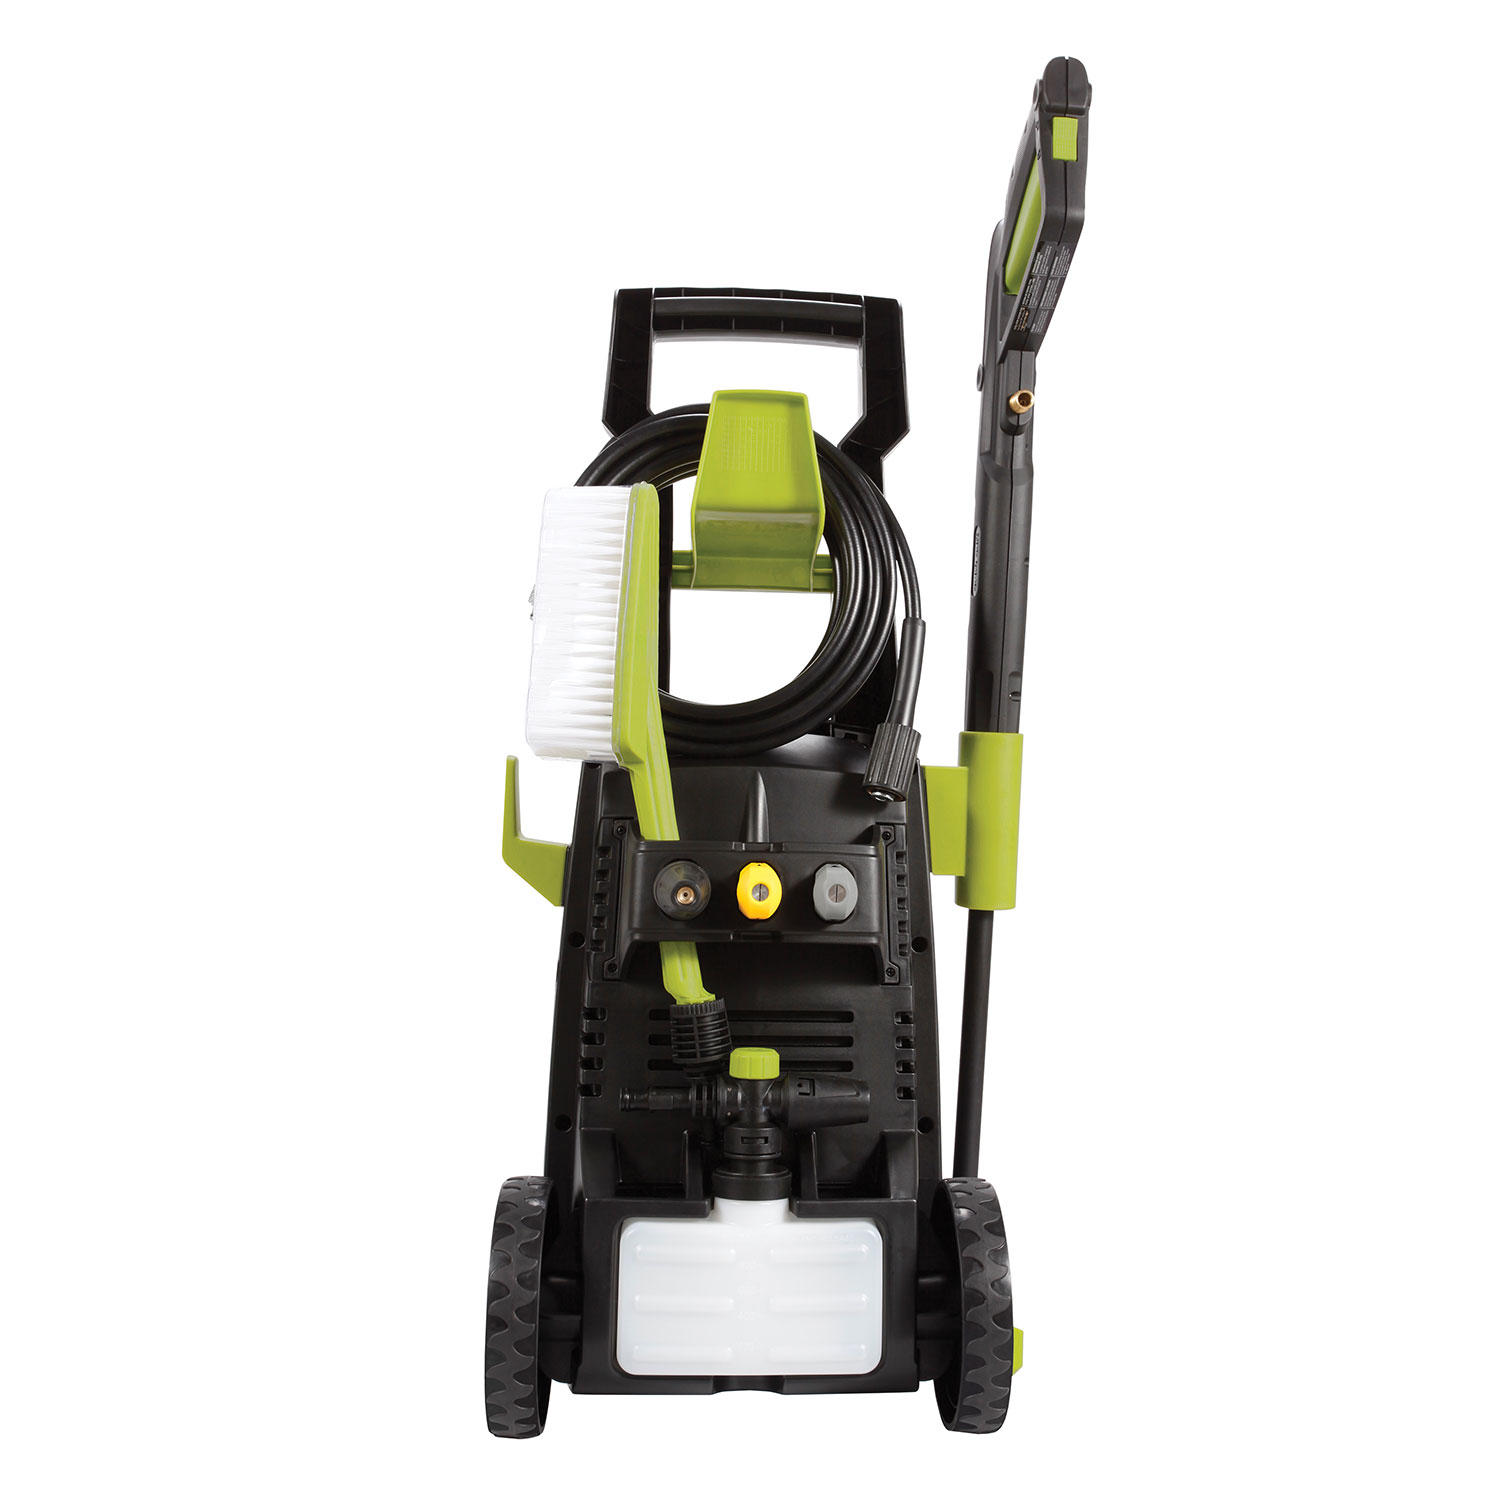 Sun Joe 2080PSI Electric Pressure Washer (In-Store Only) $69.91